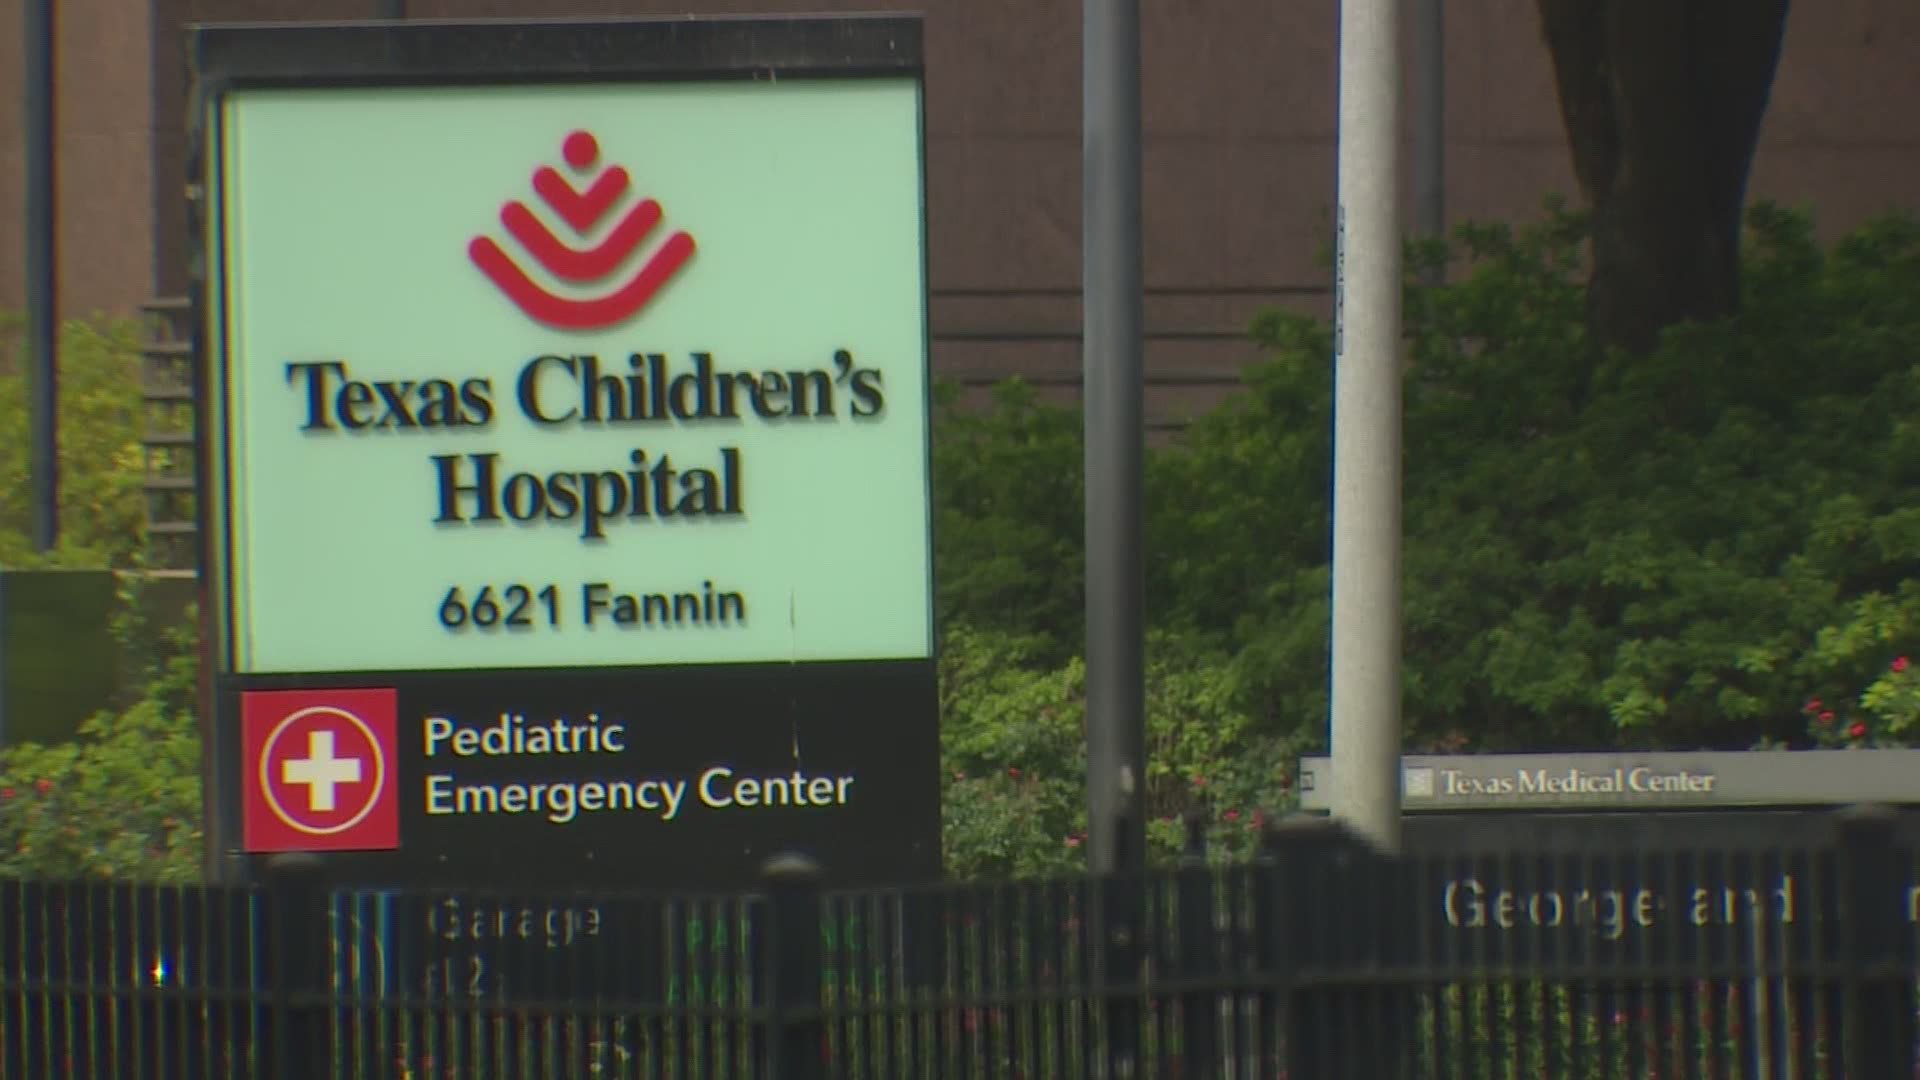 COVID-19 case numbers are surging, and kids aren't excluded. With Texas schools set to start in person classes next month, Texas Children’s Hospital shares advice.